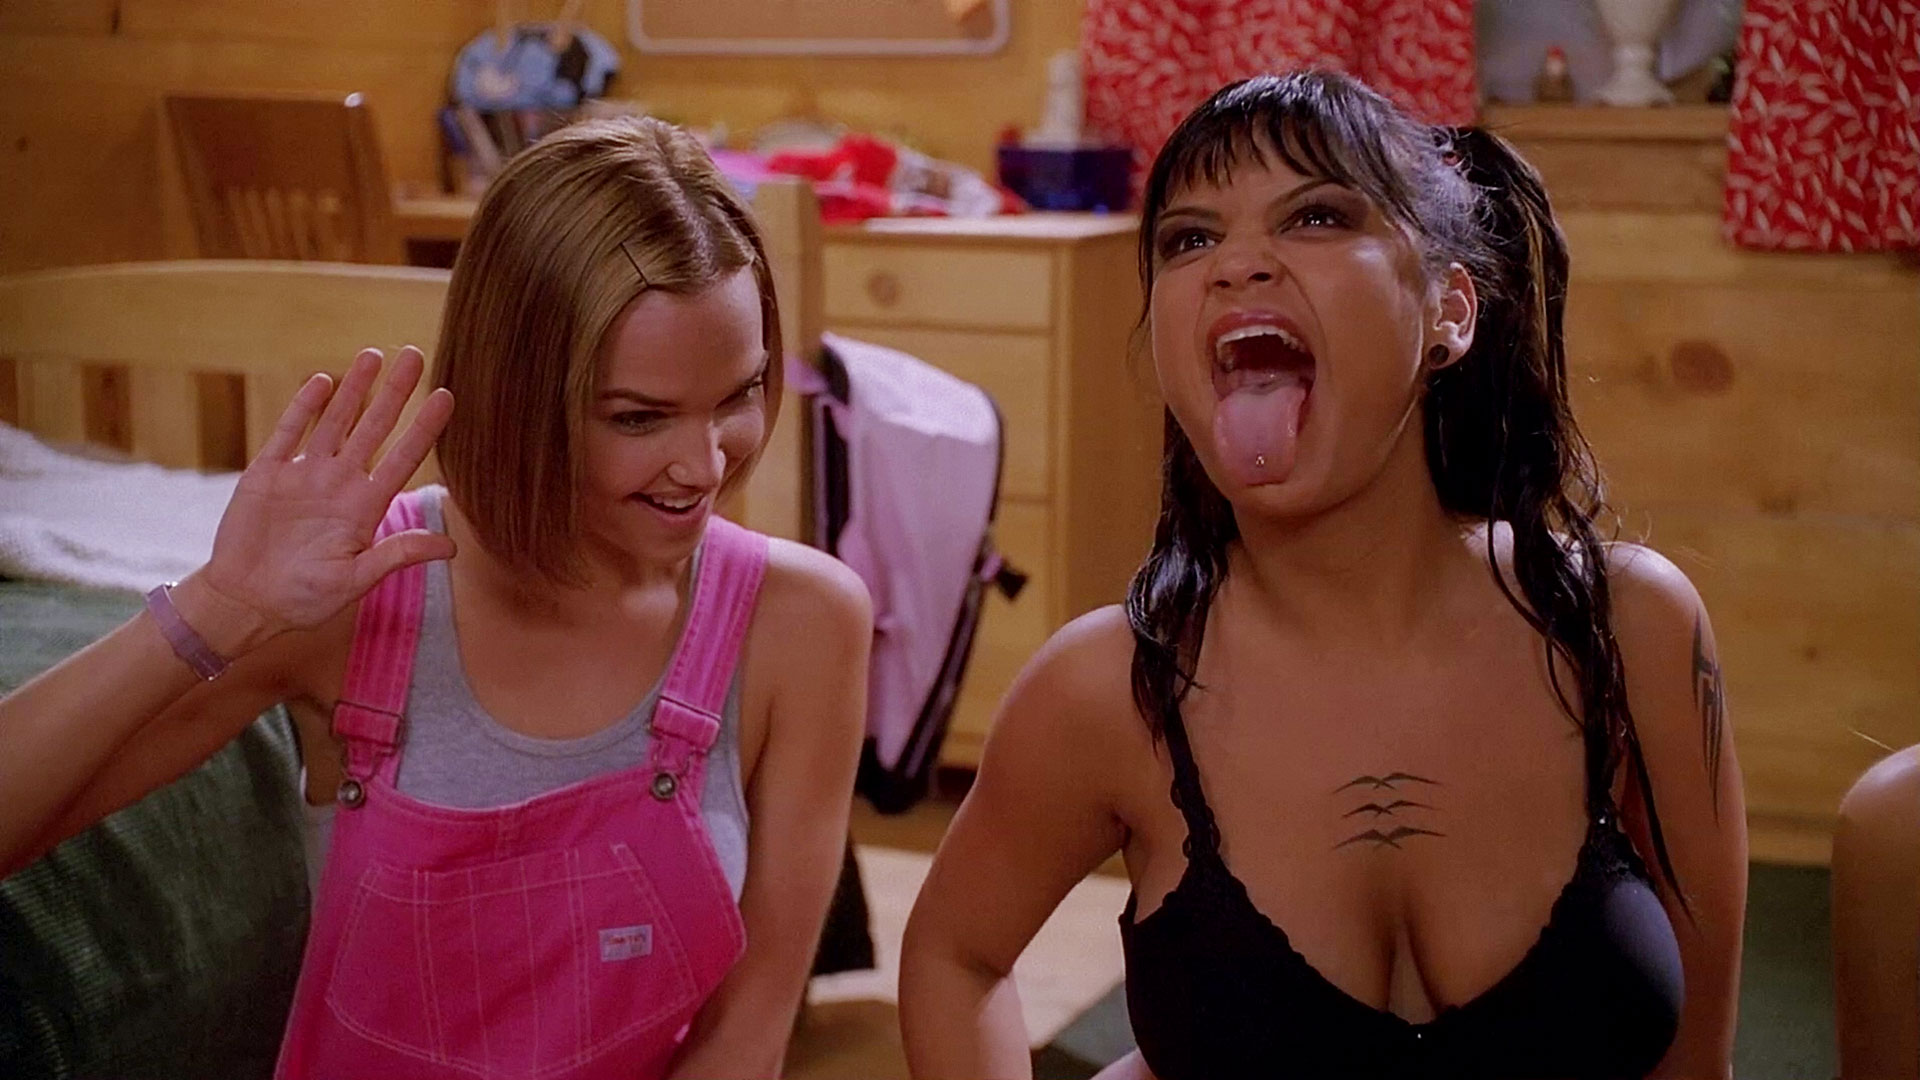 Arielle Kebbel and Crystle Lightning in American Pie Presents: Band Camp